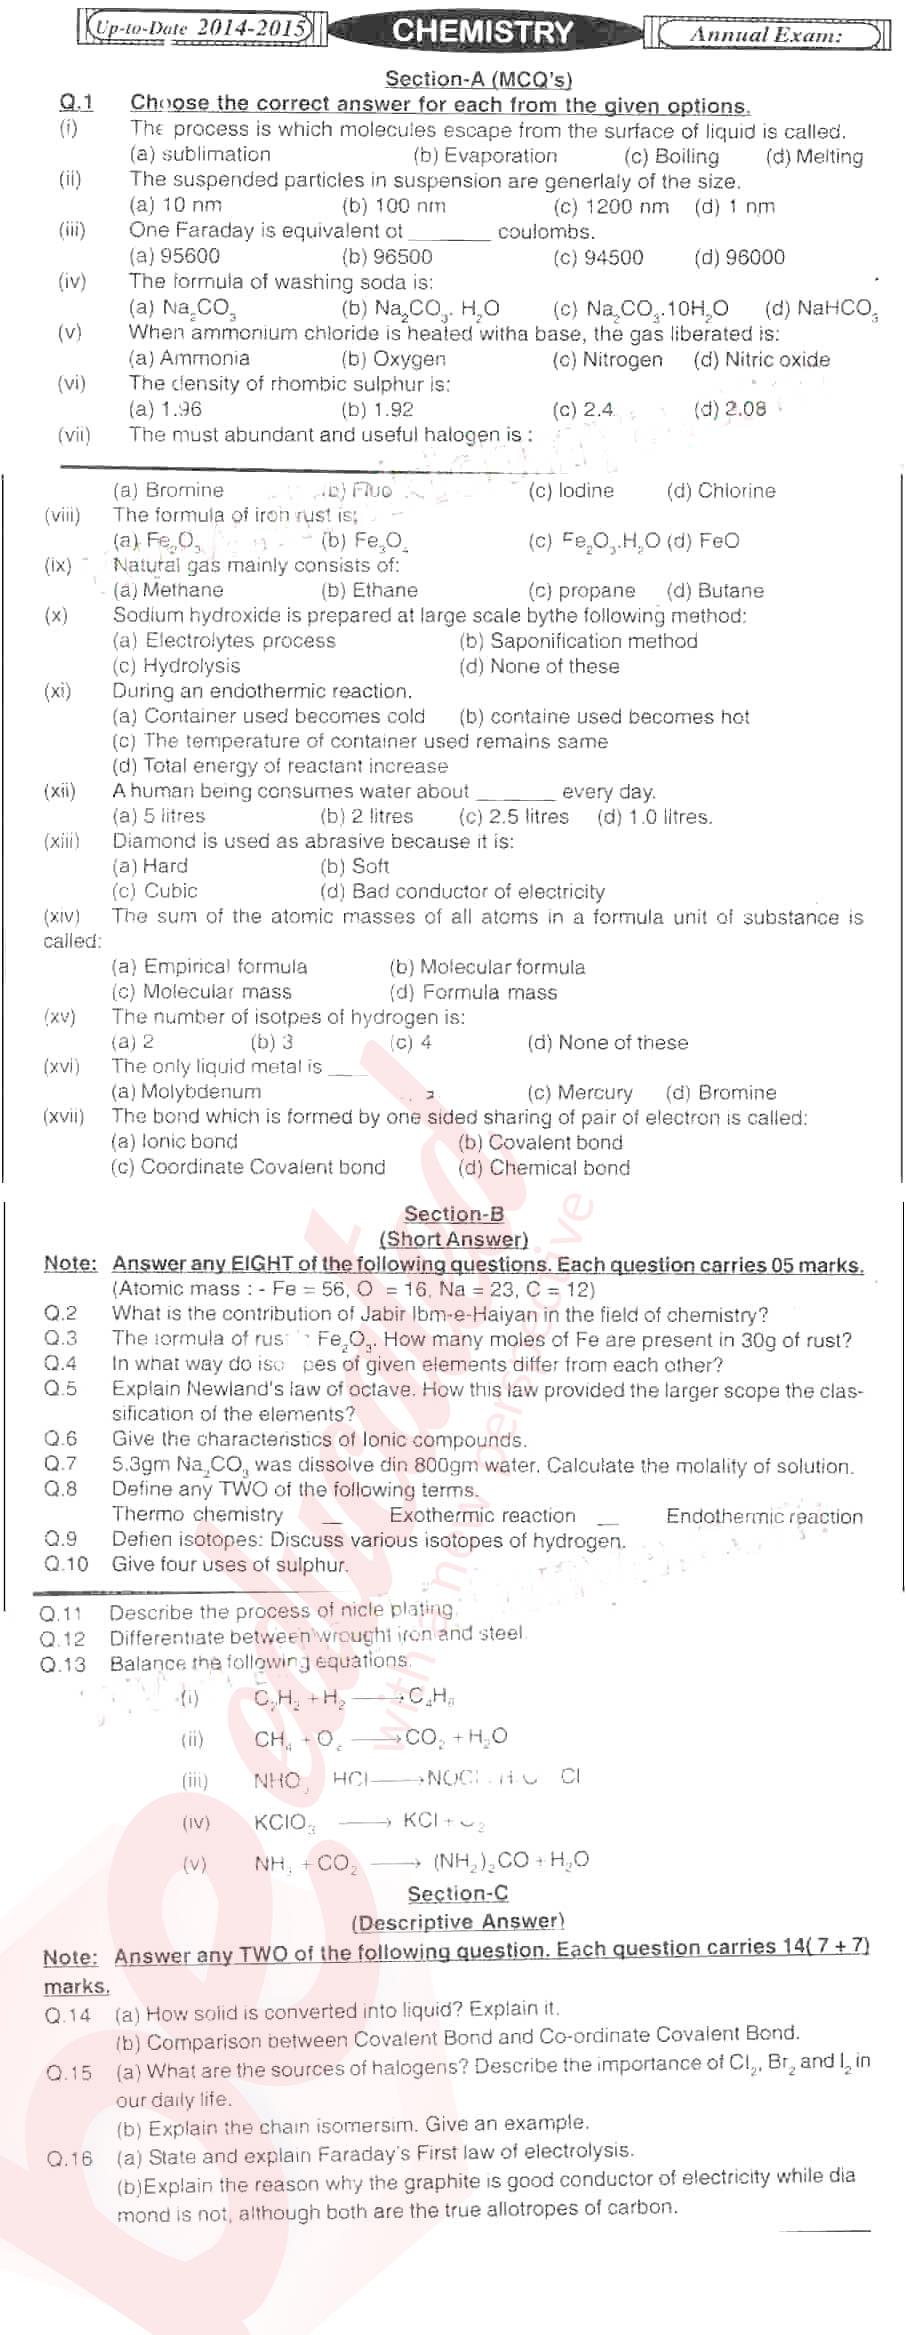 Chemistry 9th English Medium Past Paper Group 1 BISE Hyderabad 2014